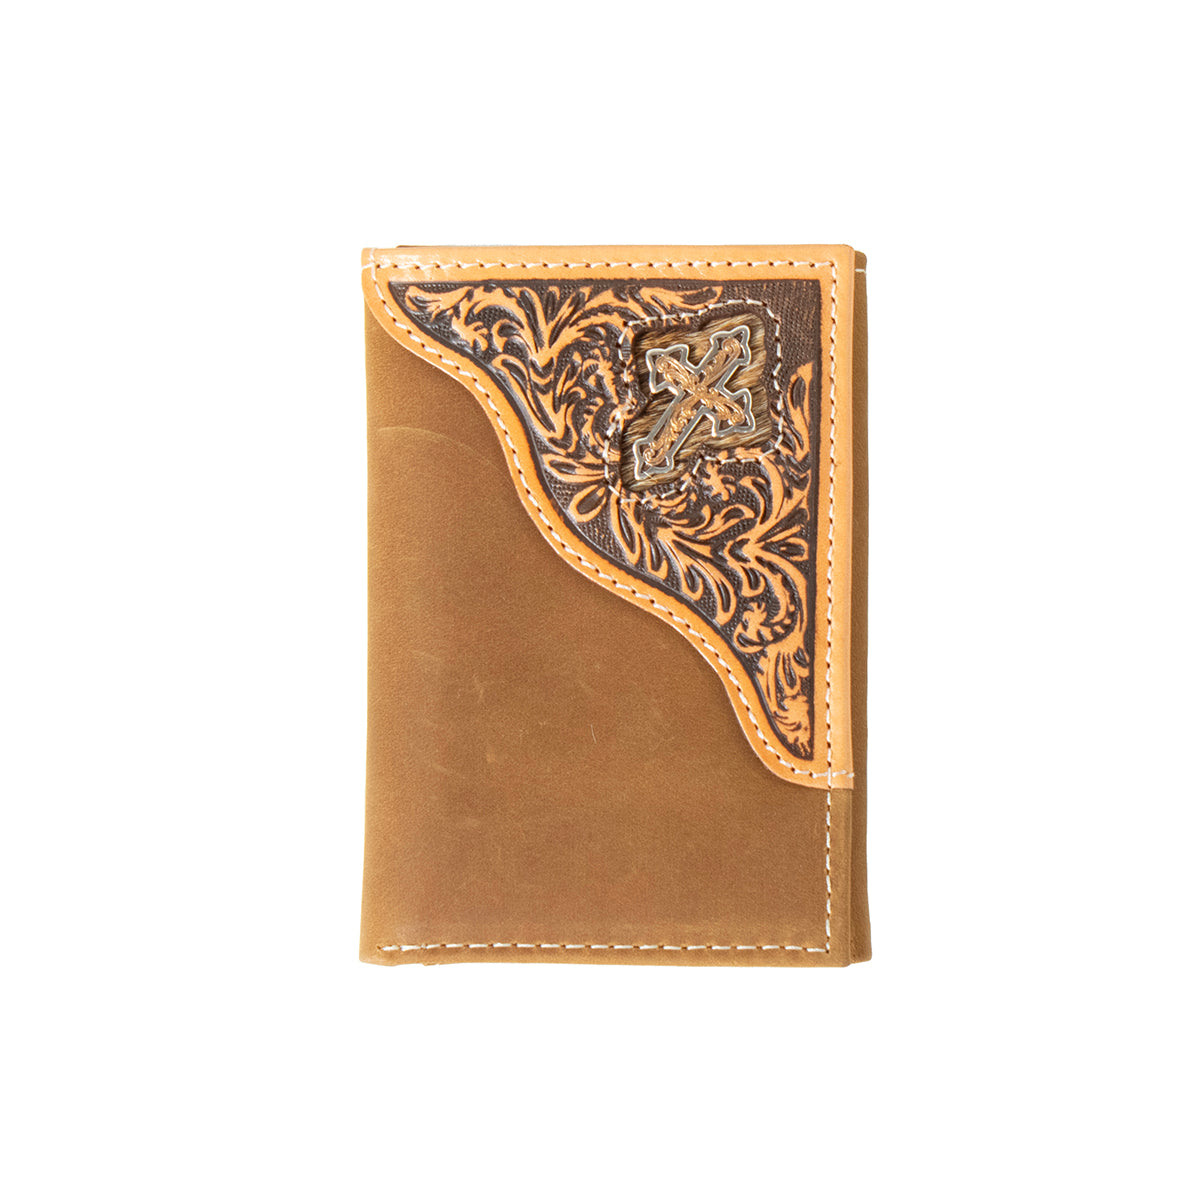 3D Men's Cross Concho Floral Embossed Trifold Wallet - Brown